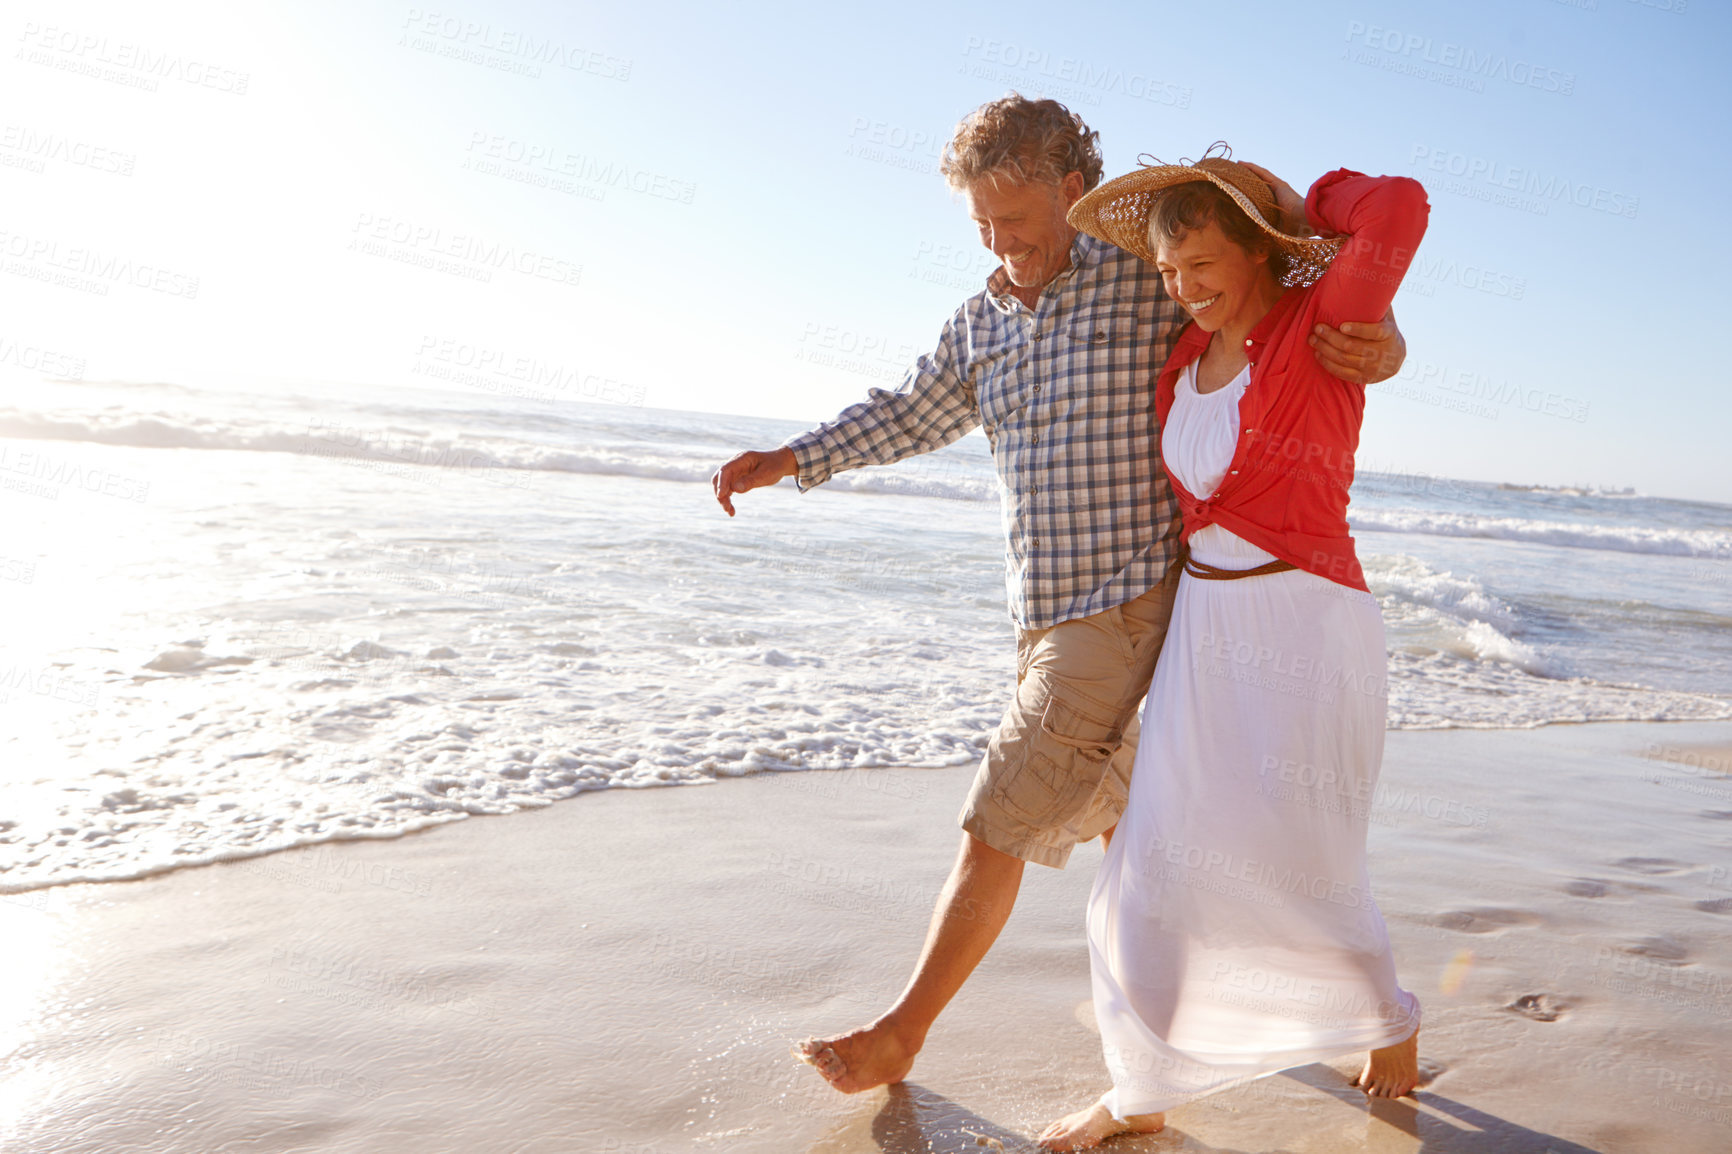 Buy stock photo Shot of a mature couple enjoying a late afternoon walk on the beach